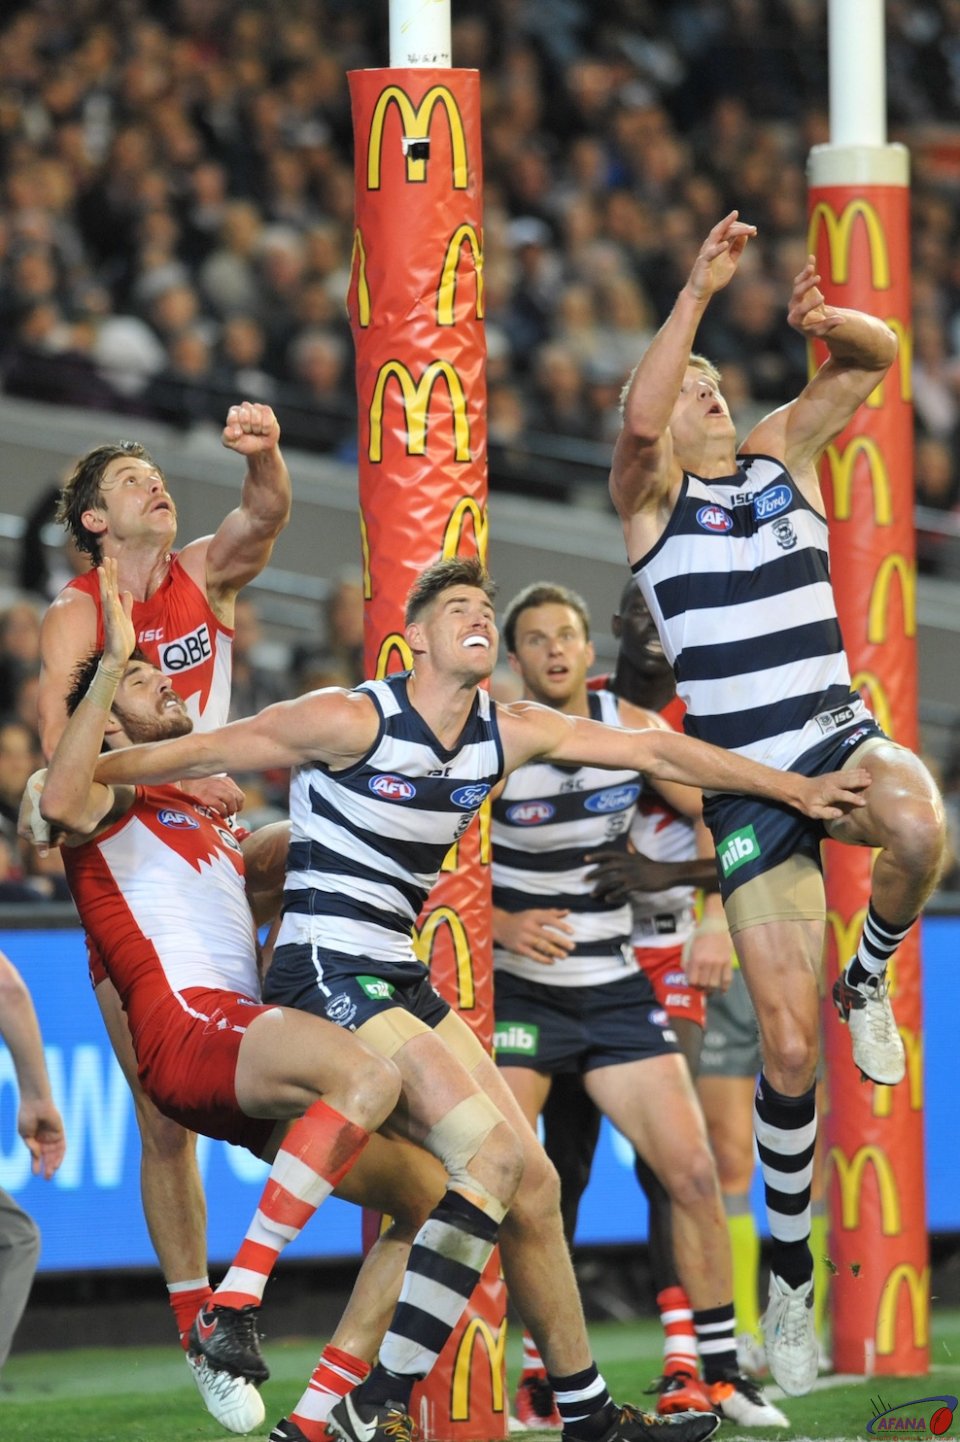 Big pack ready to launch as Geelong bomb the ball in